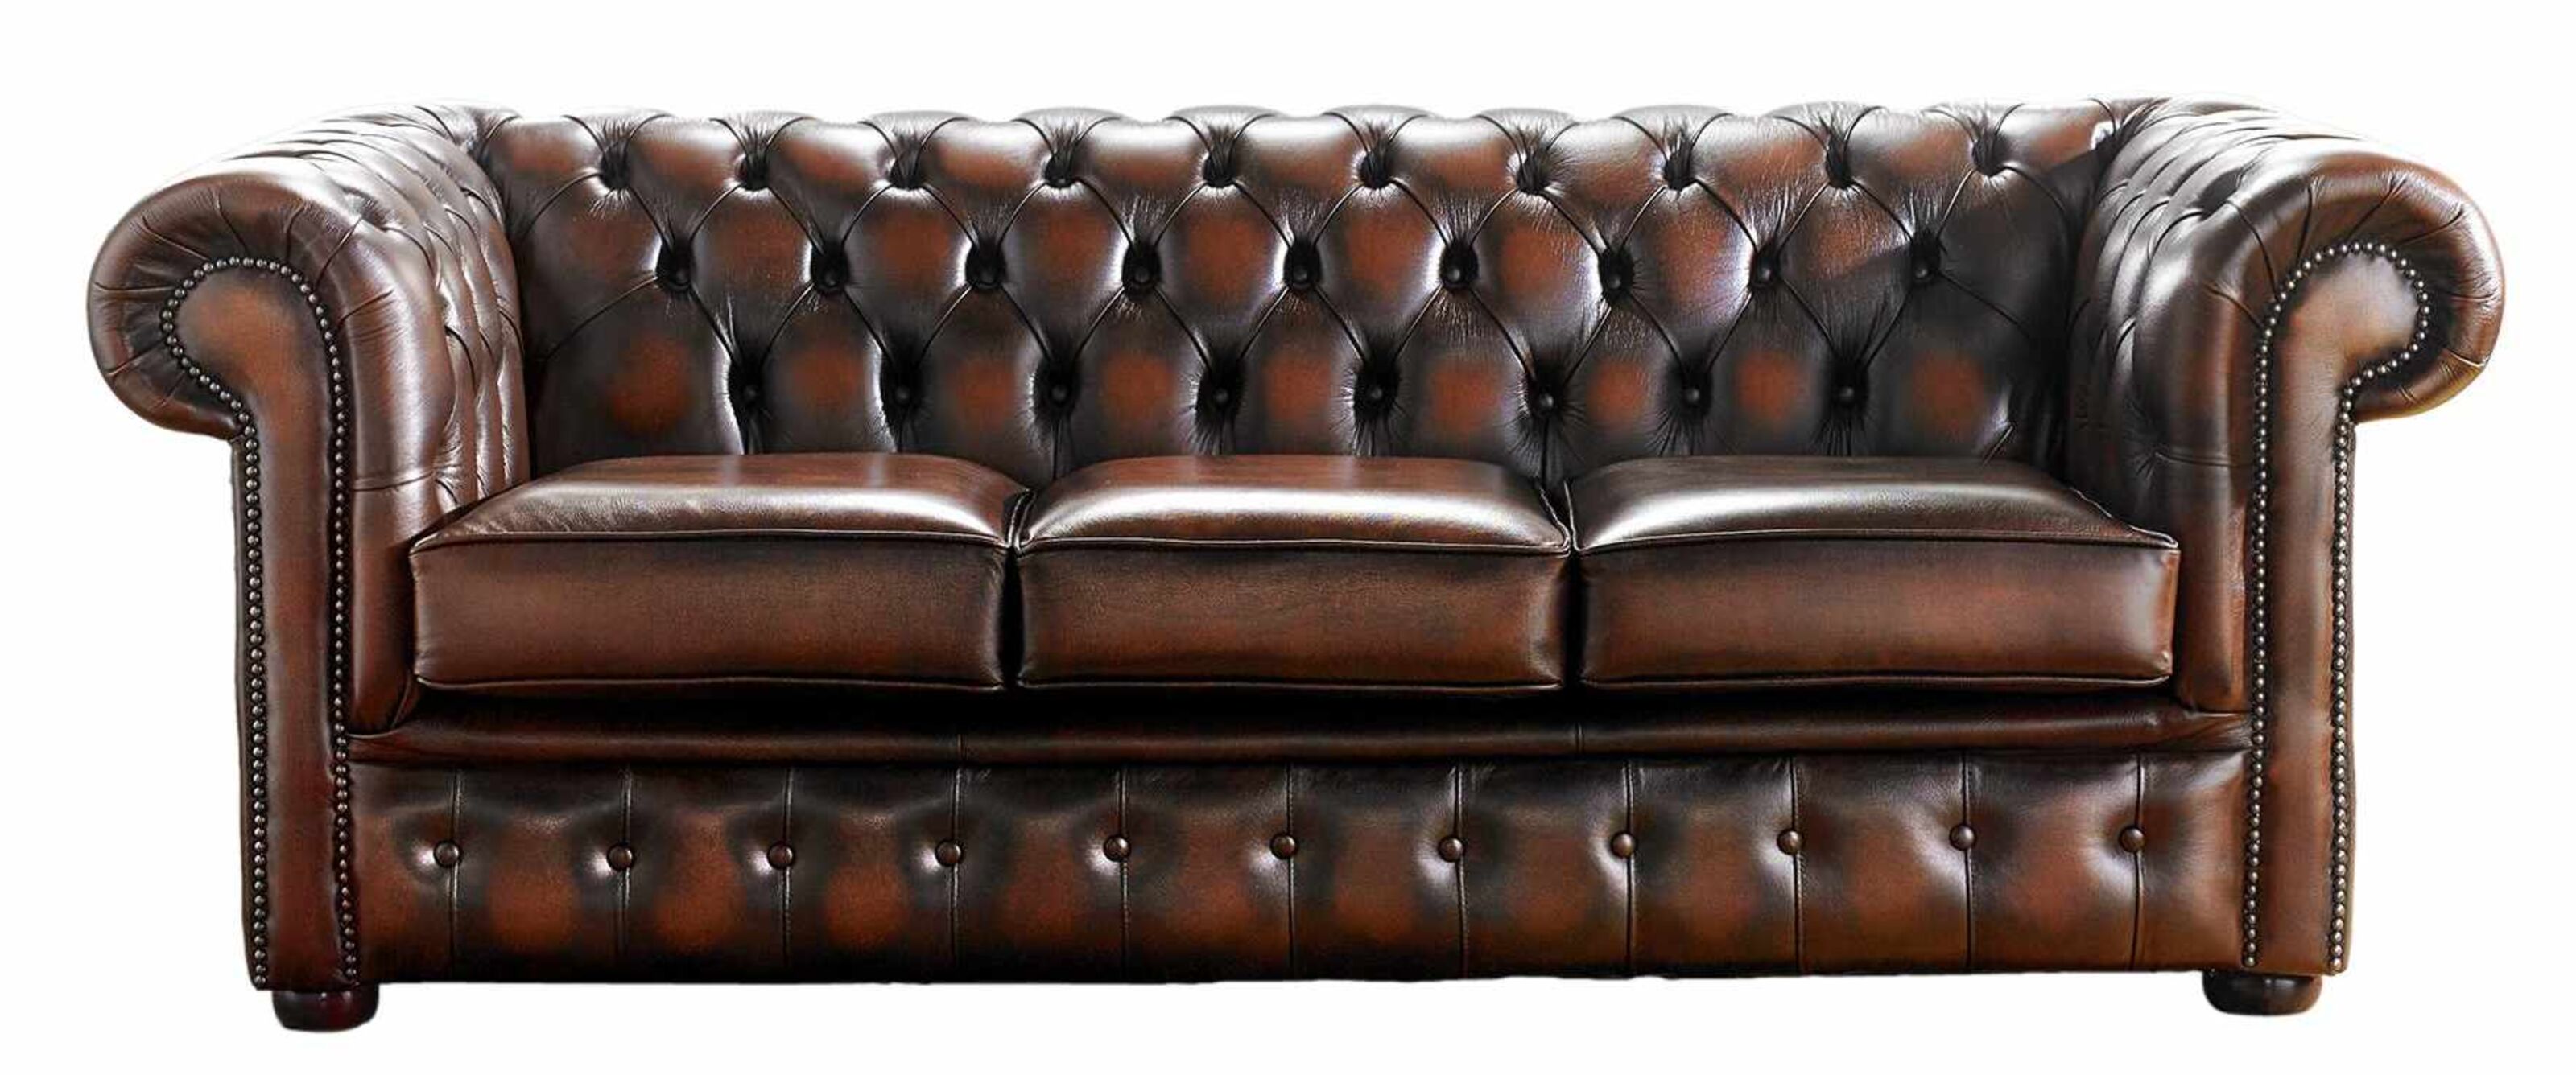 The Timeless Elegance of Chesterfield Sofas  %Post Title